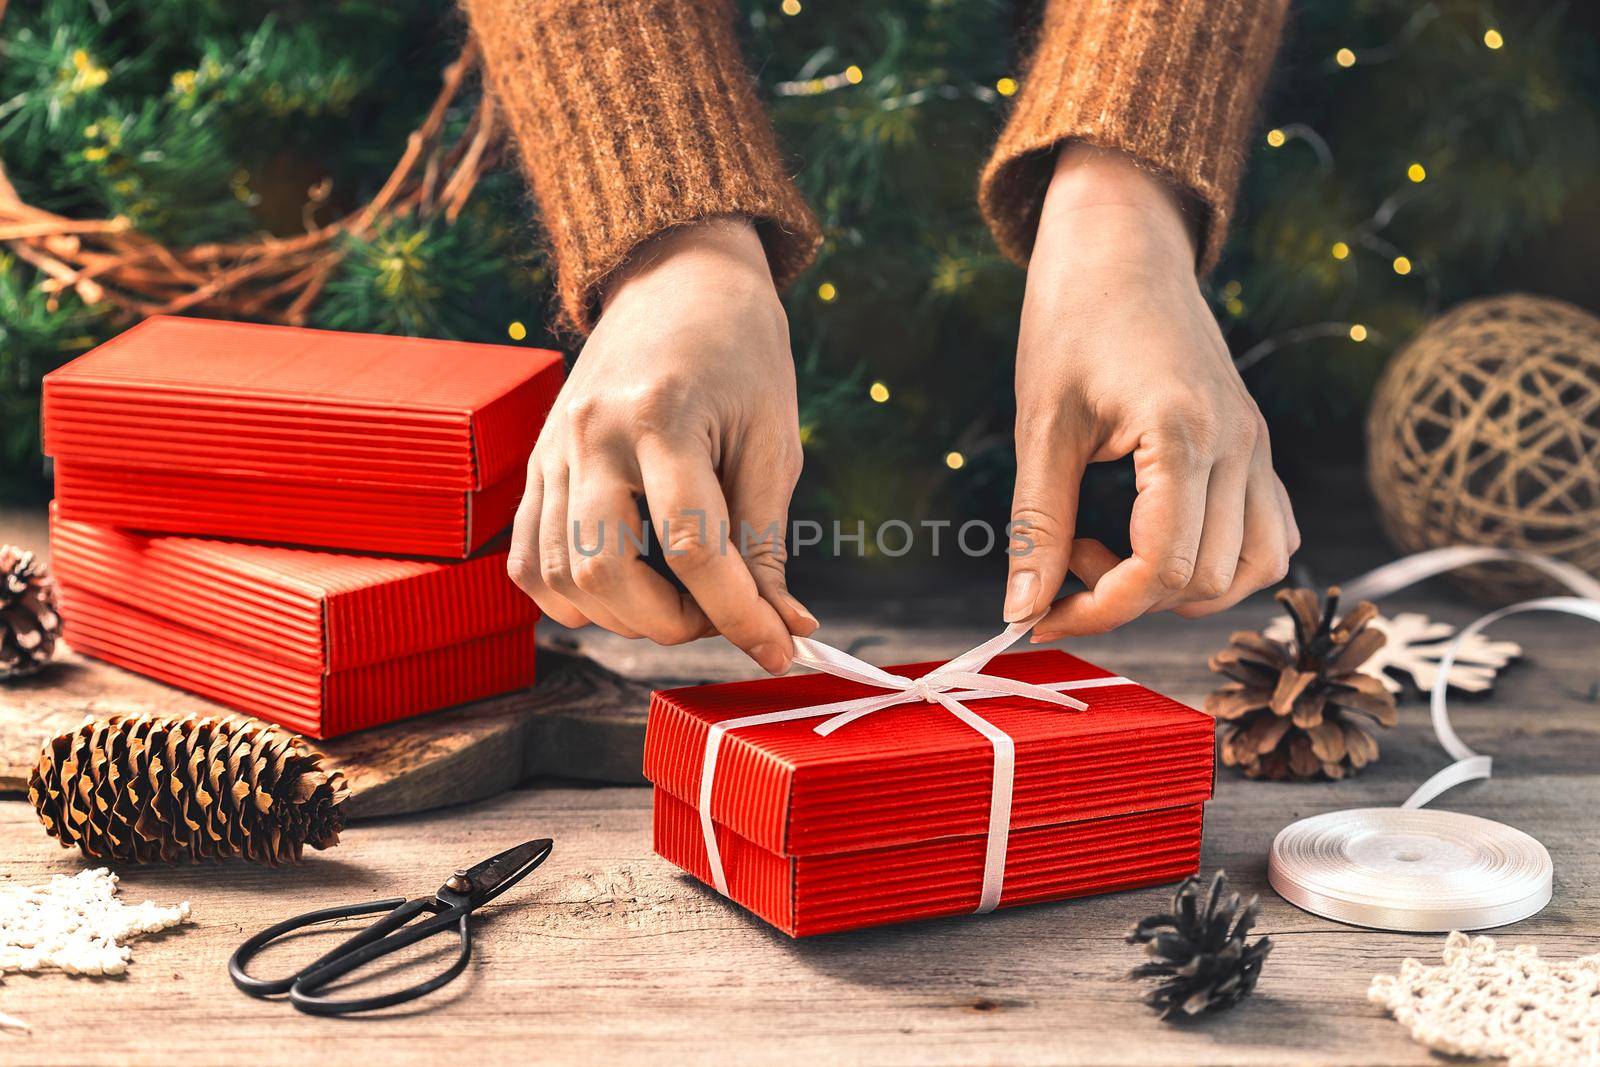 Preparing gift boxes with ribbon for xmas presents by Syvanych